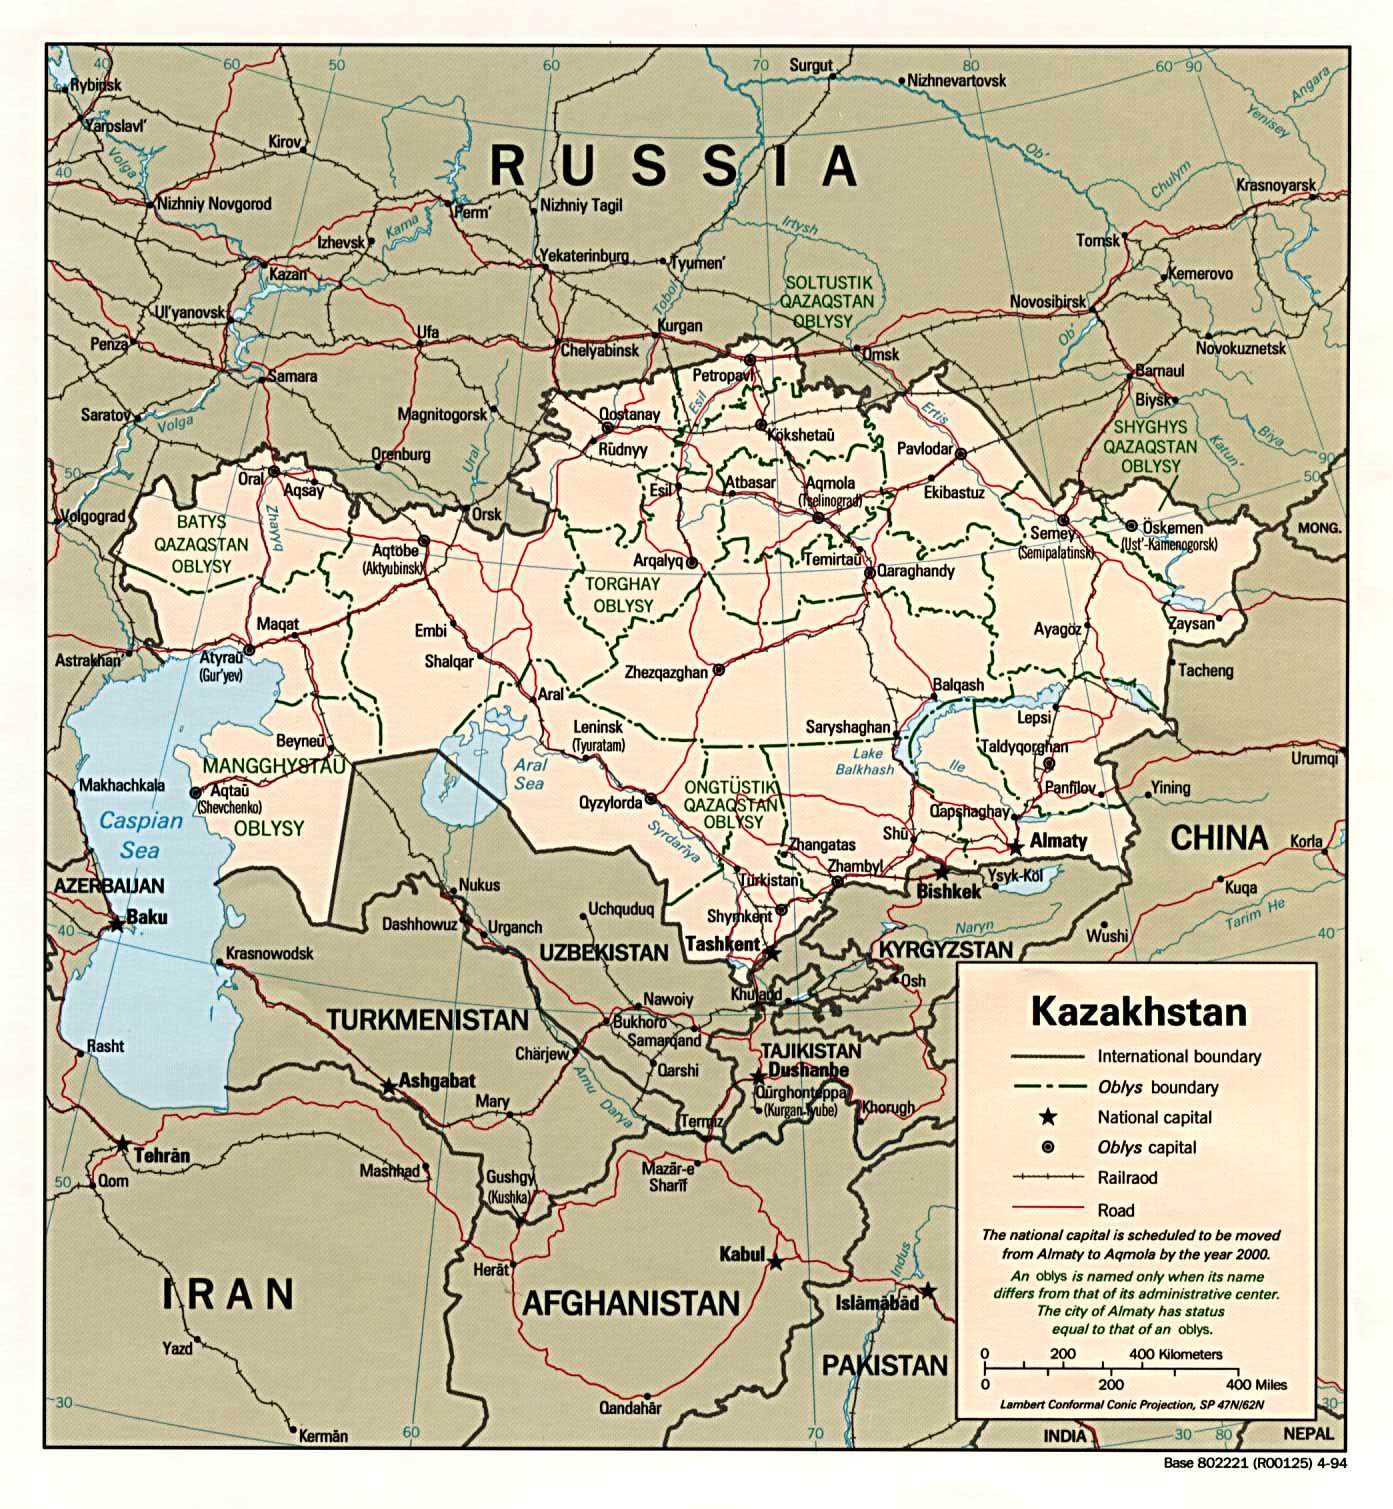 Kazakhstan Maps - Perry-Castañeda Map Collection - UT Library Online